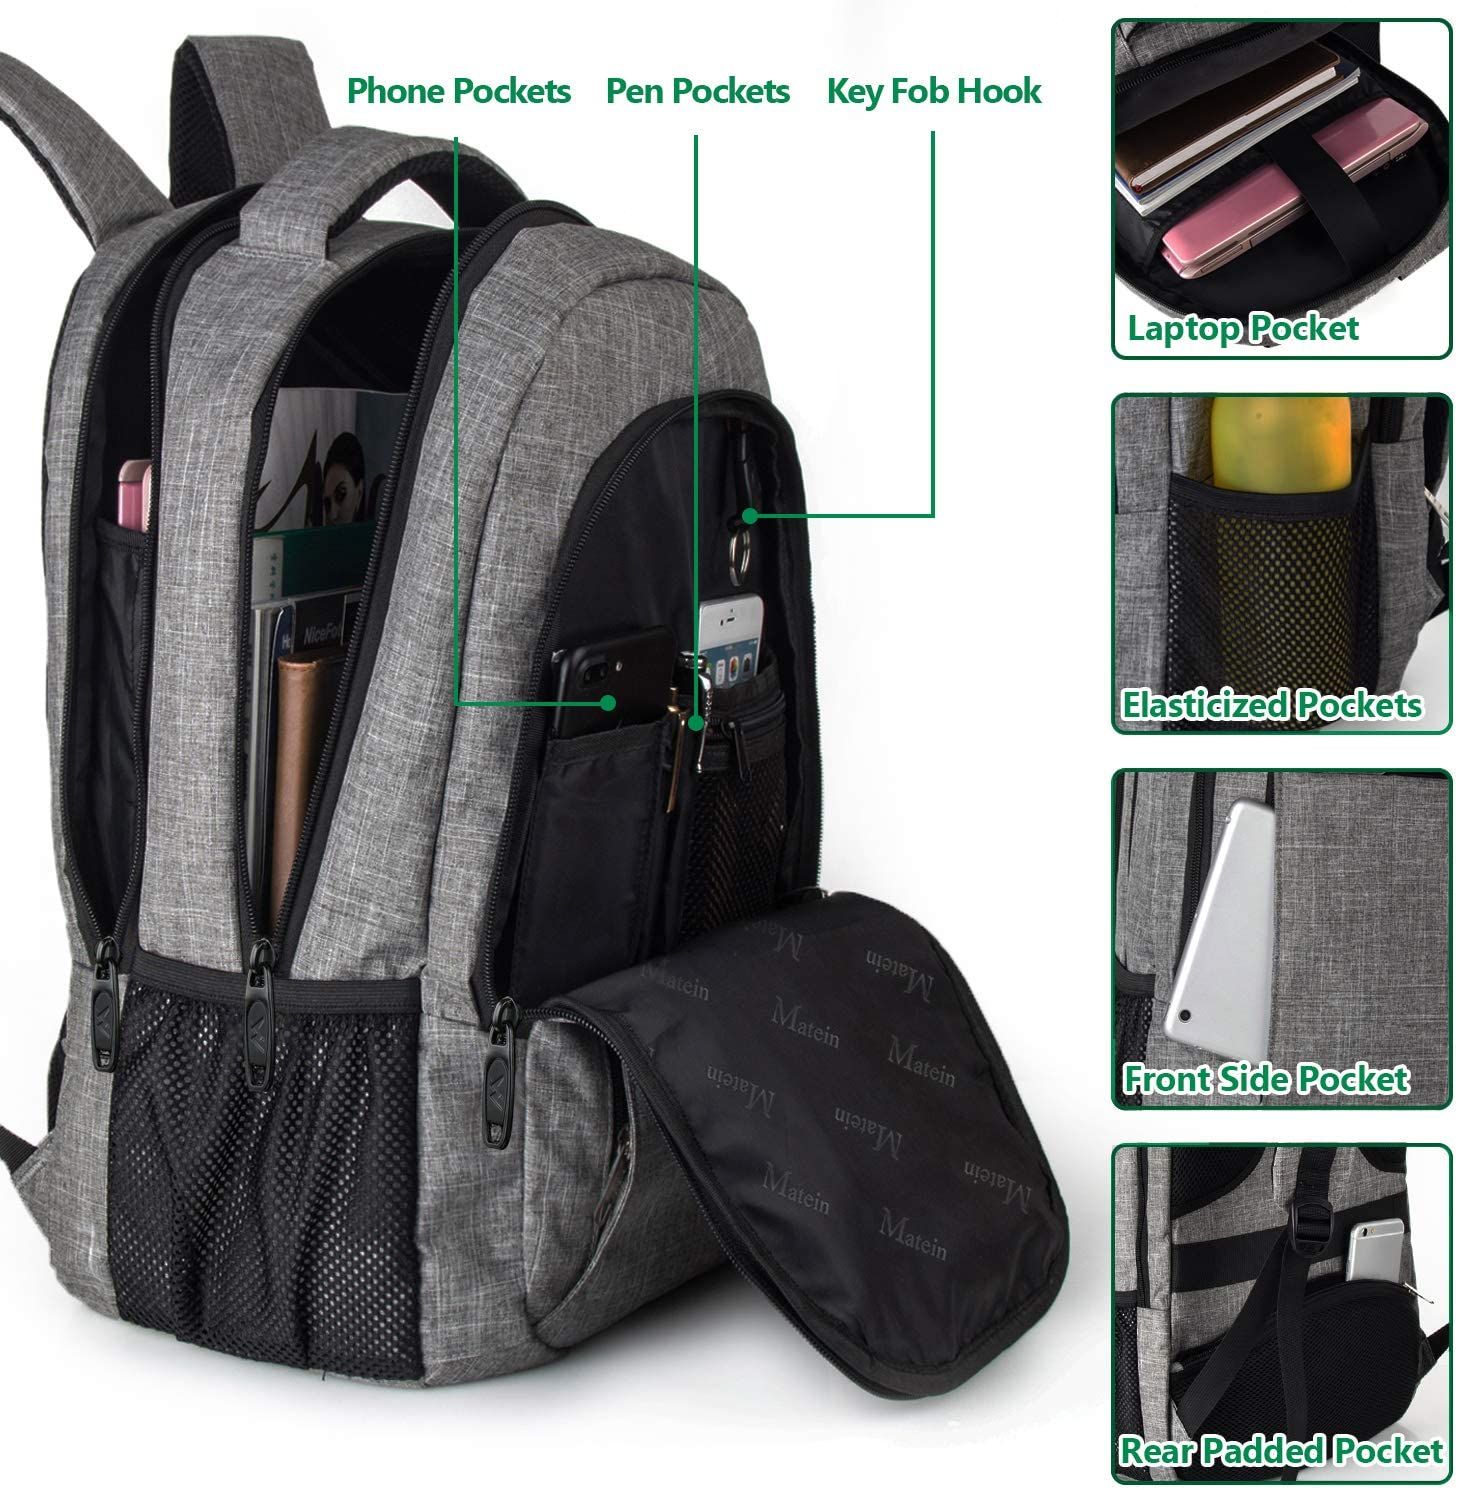 Matein Travel Laptop Backpack compartments